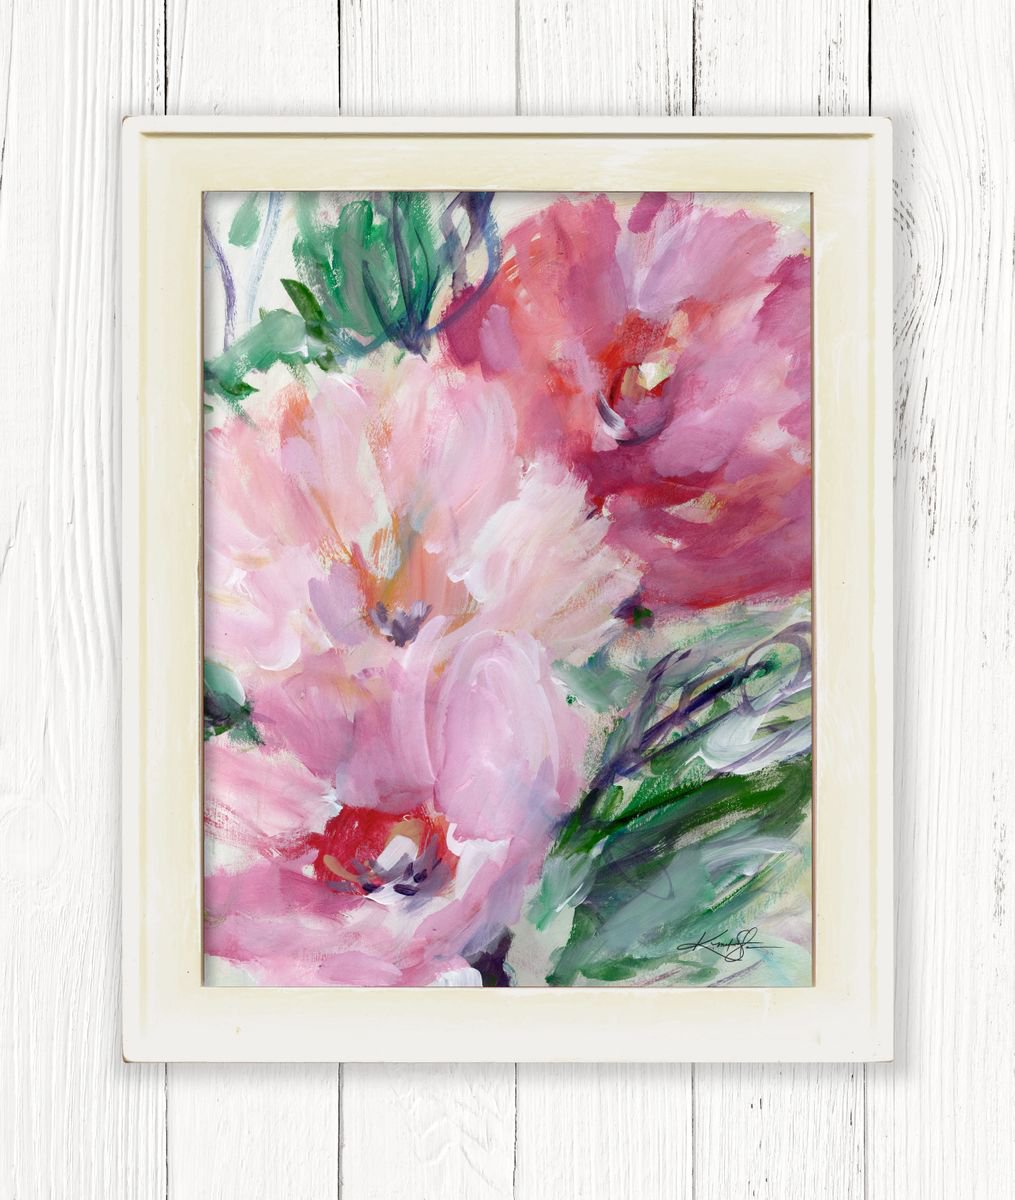 Shabby Chic Charm 23 - Framed Floral art in Painted Distressed Frame by Kathy Morton Stani... by Kathy Morton Stanion